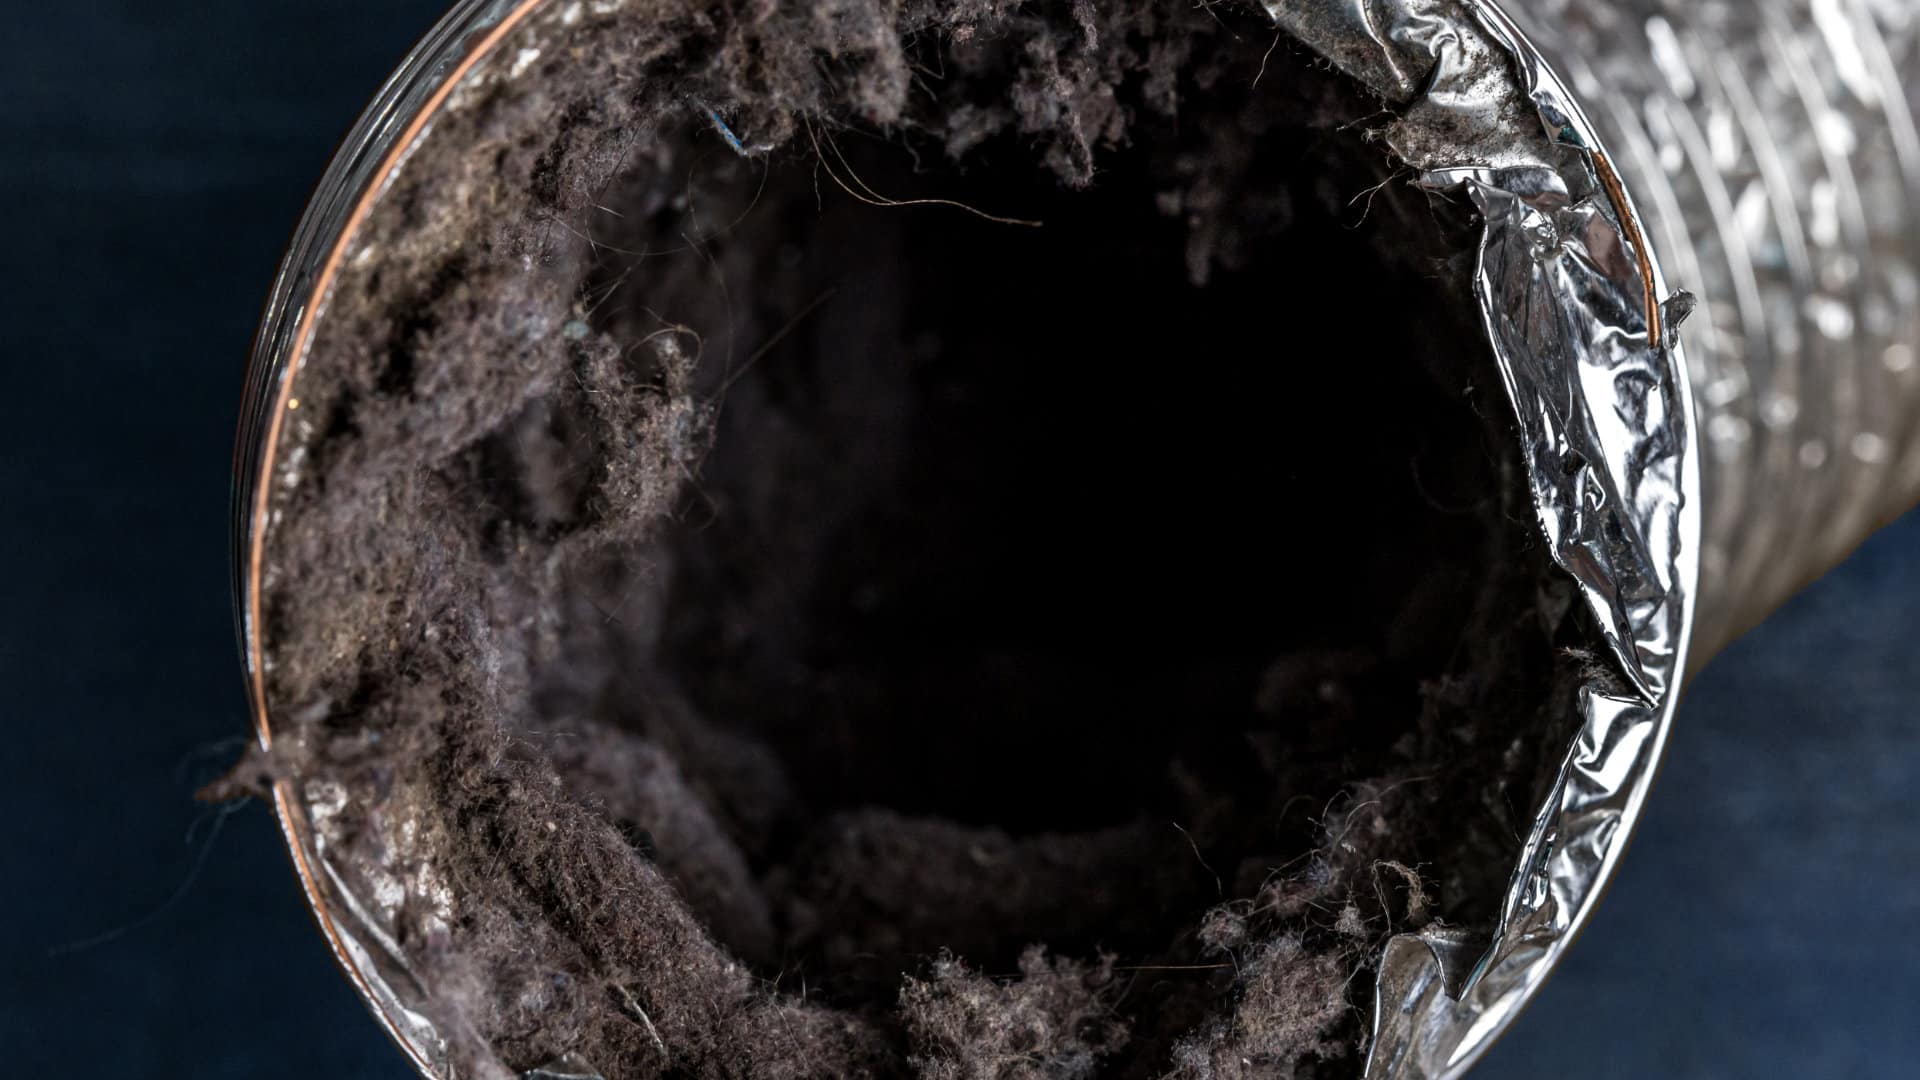 Featured image for “Dryer Vent Clogged? How to Fix It”